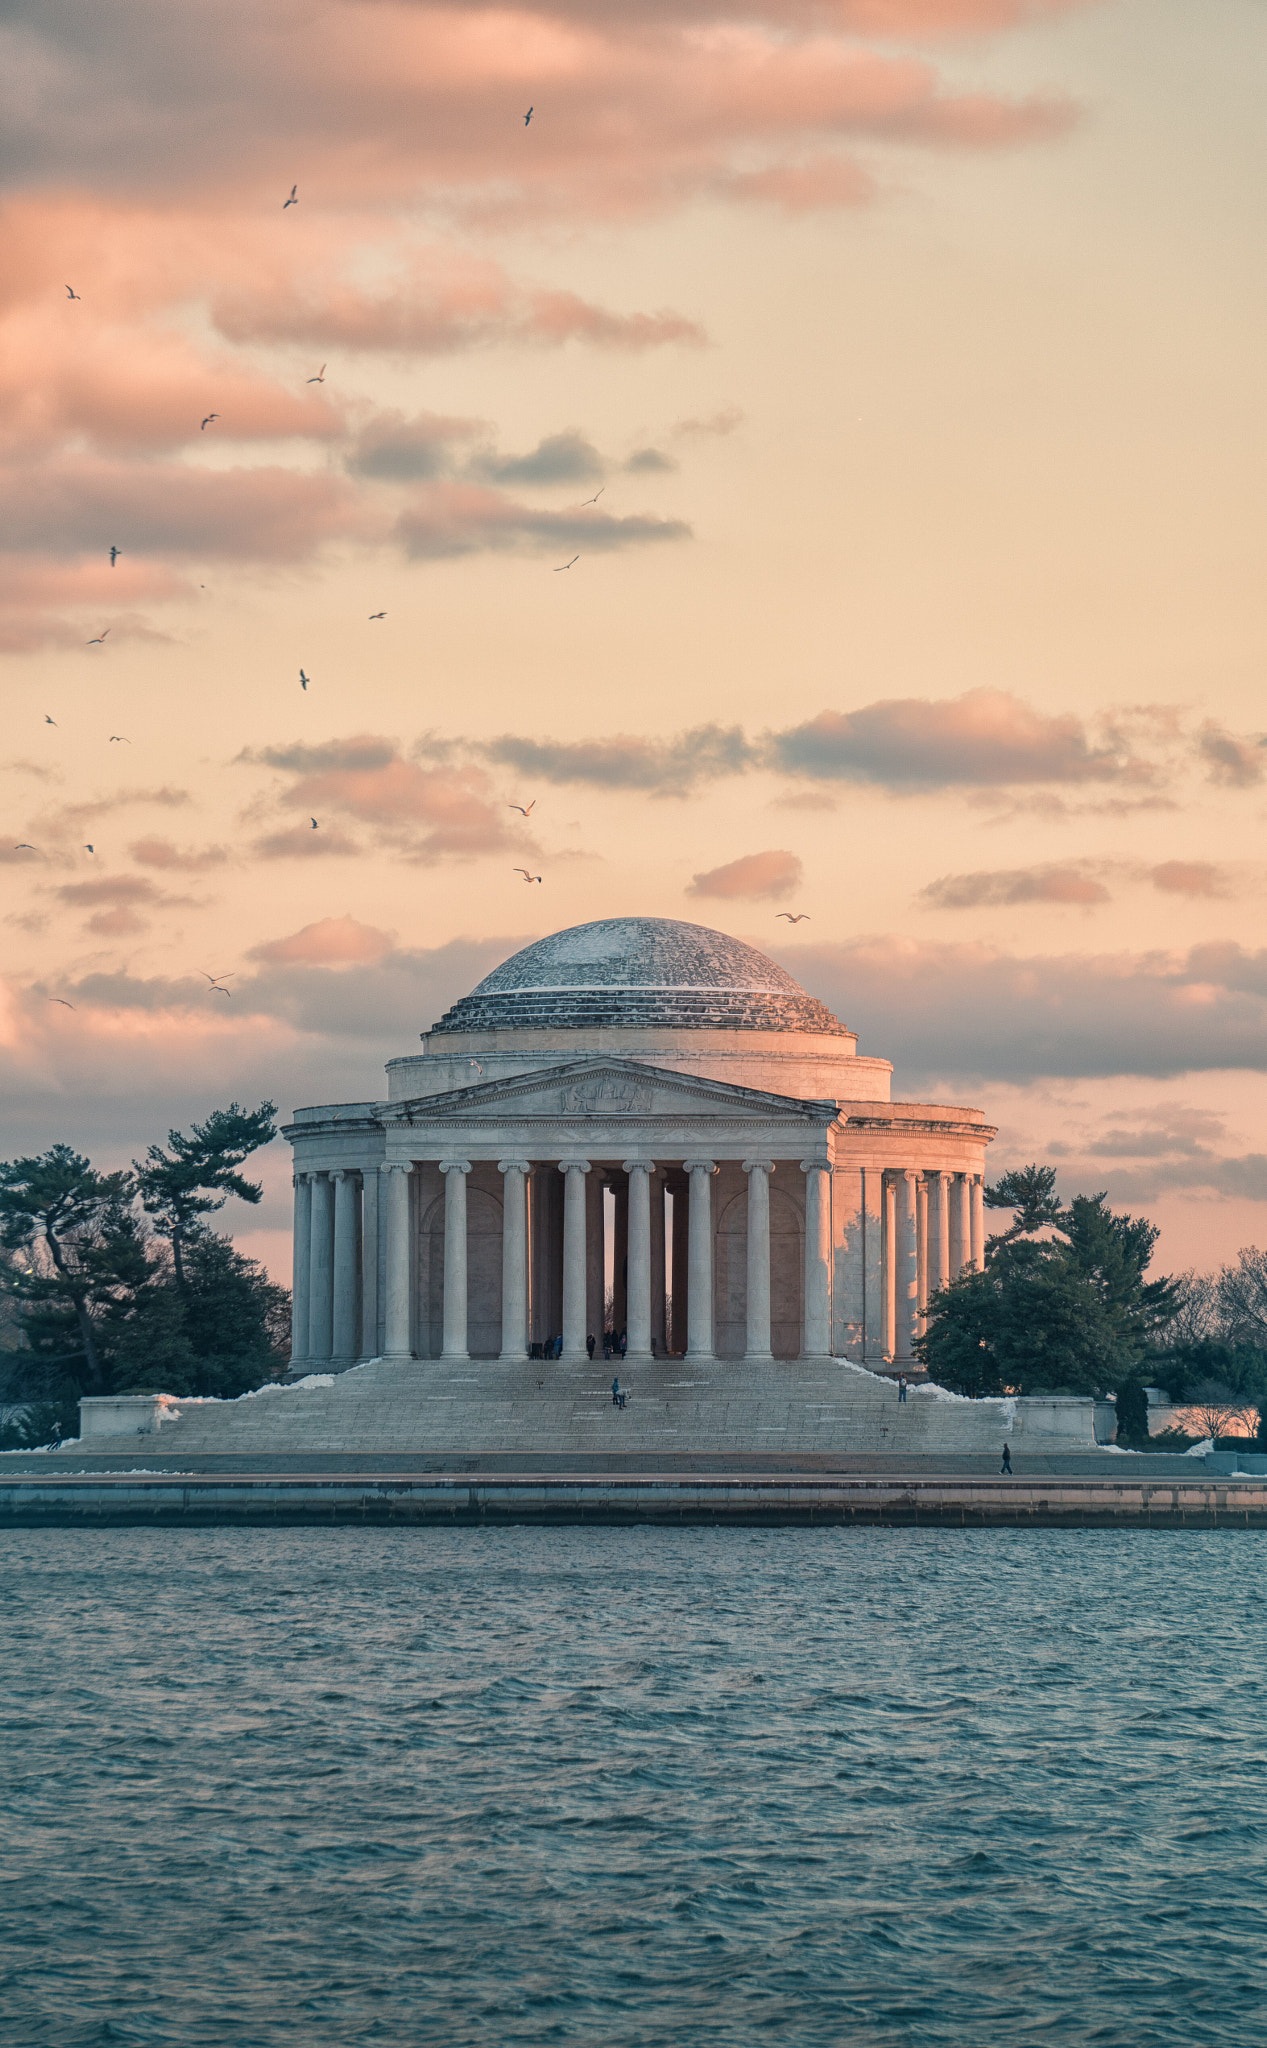 Sony a6300 sample photo. Jefferson memorial photography